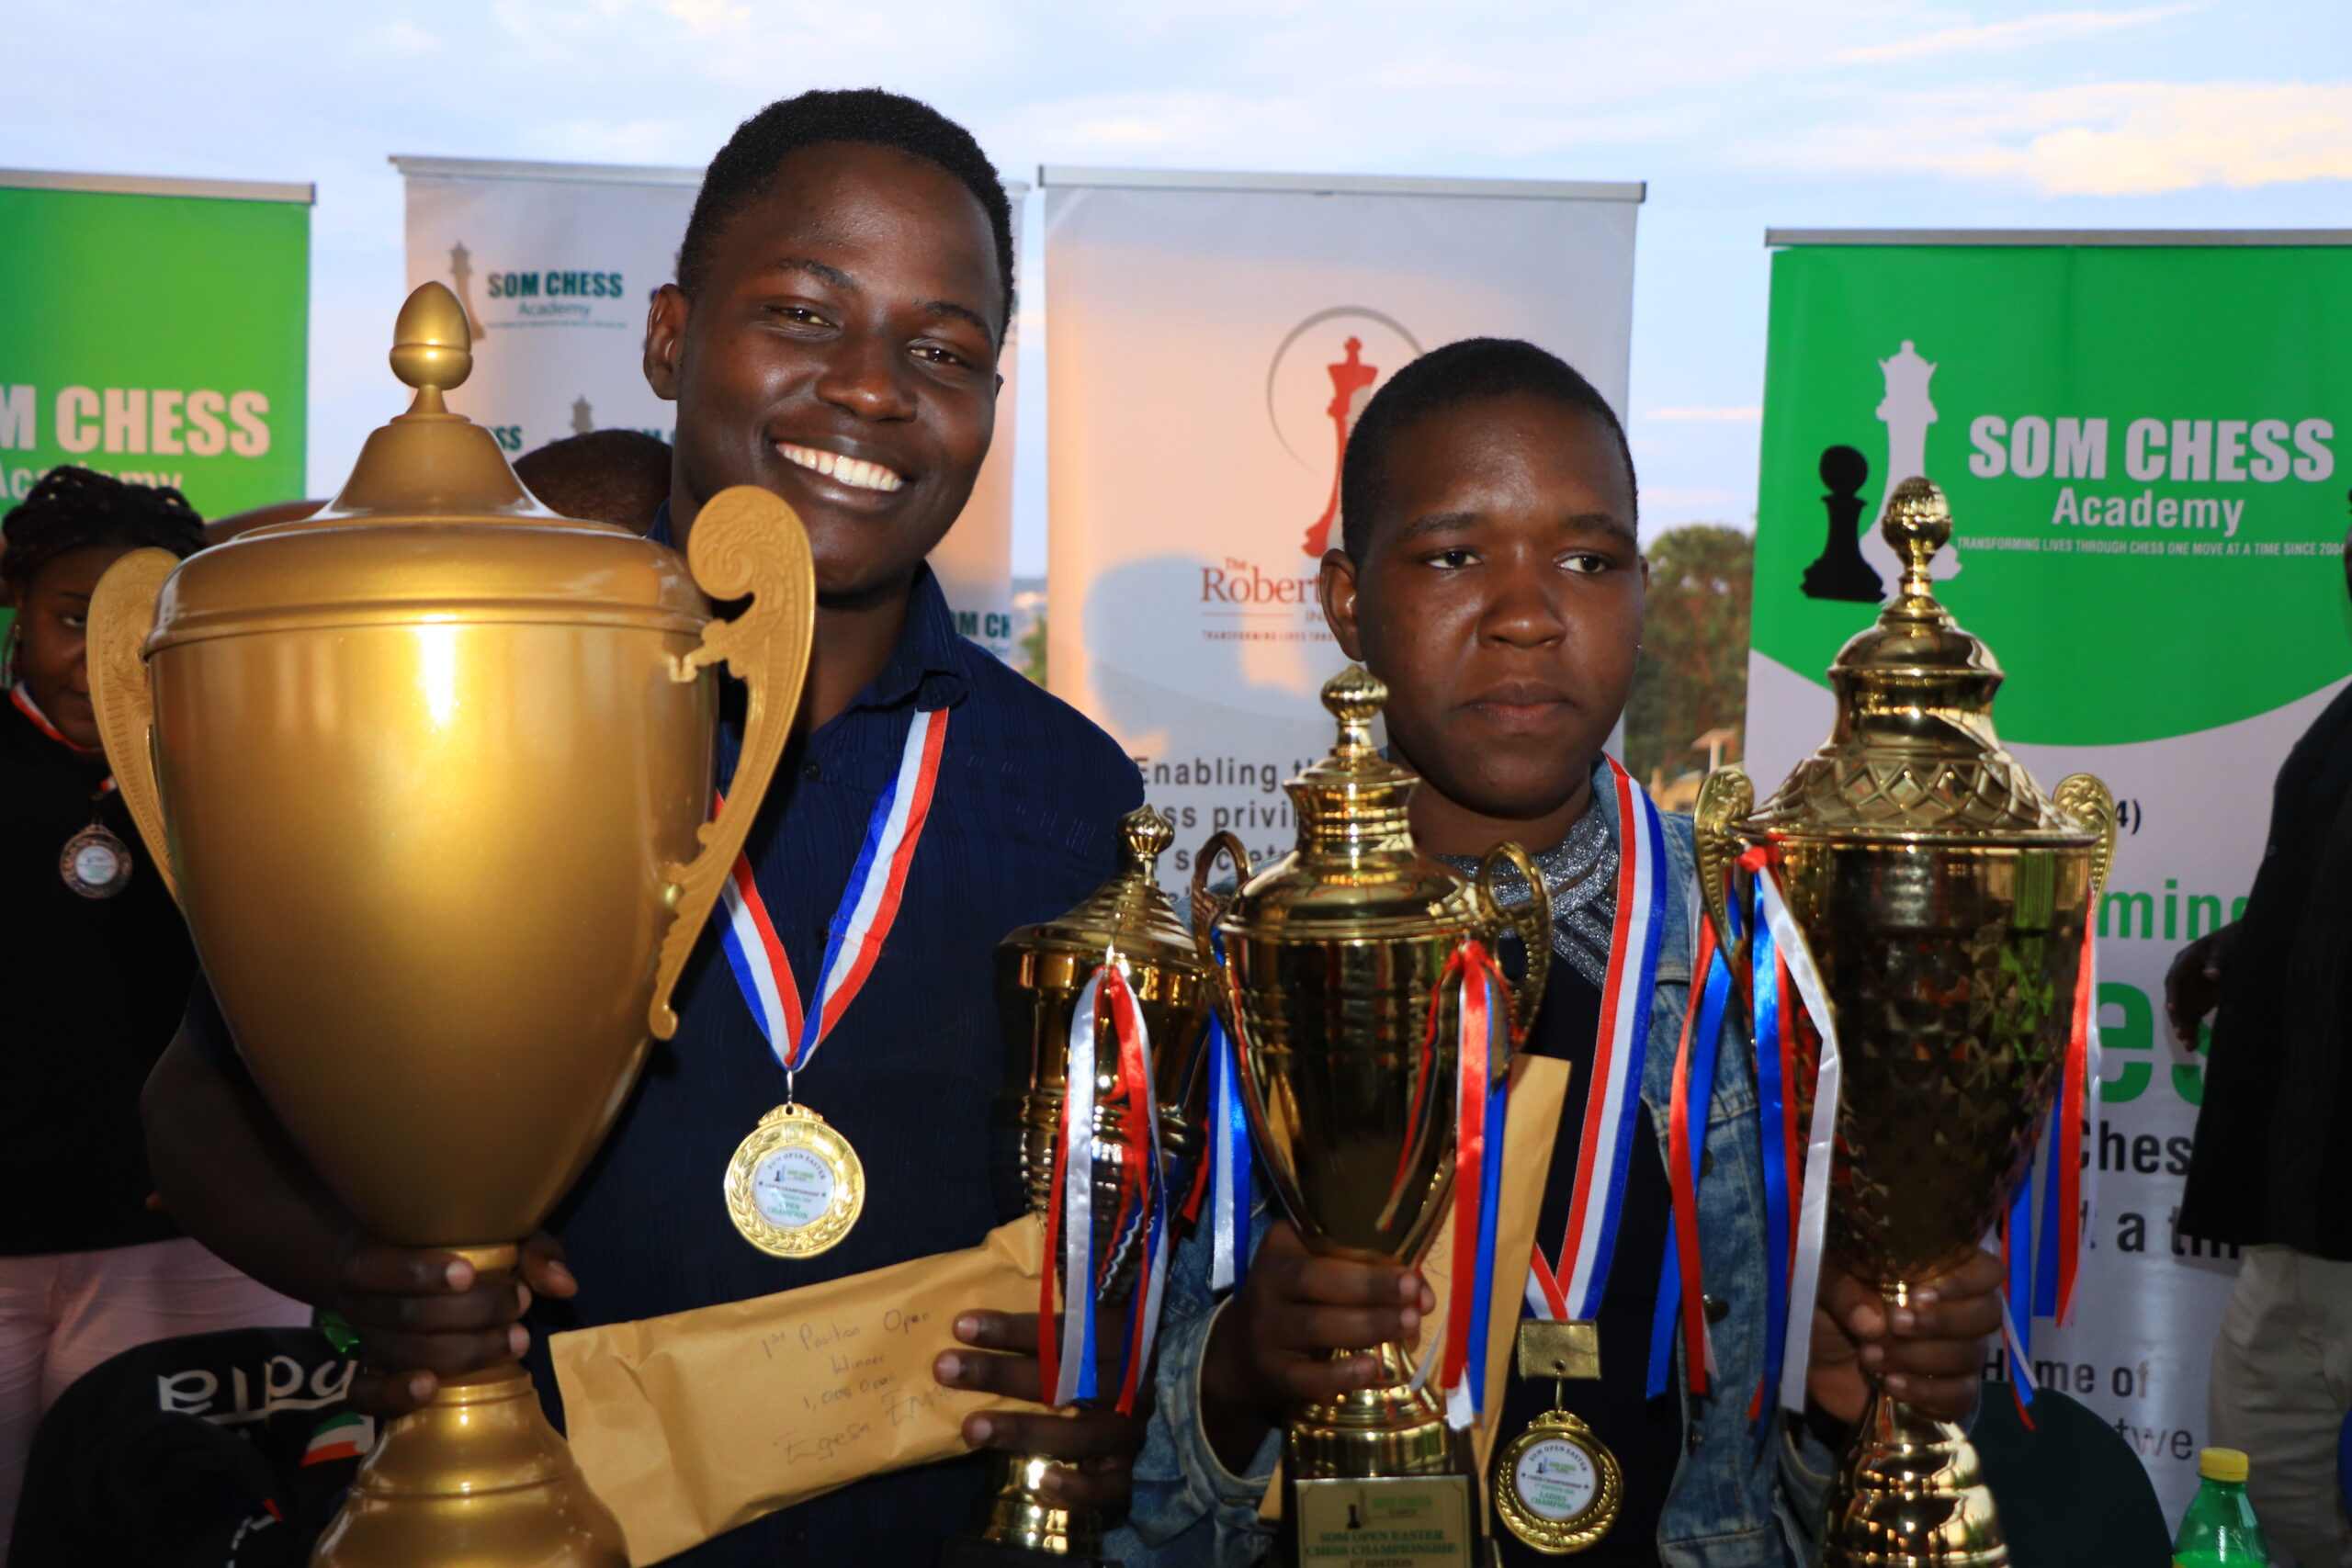 THE SOM EASTER CHESS OPEN CHAMPIONSHIP HIGHLIGHTS